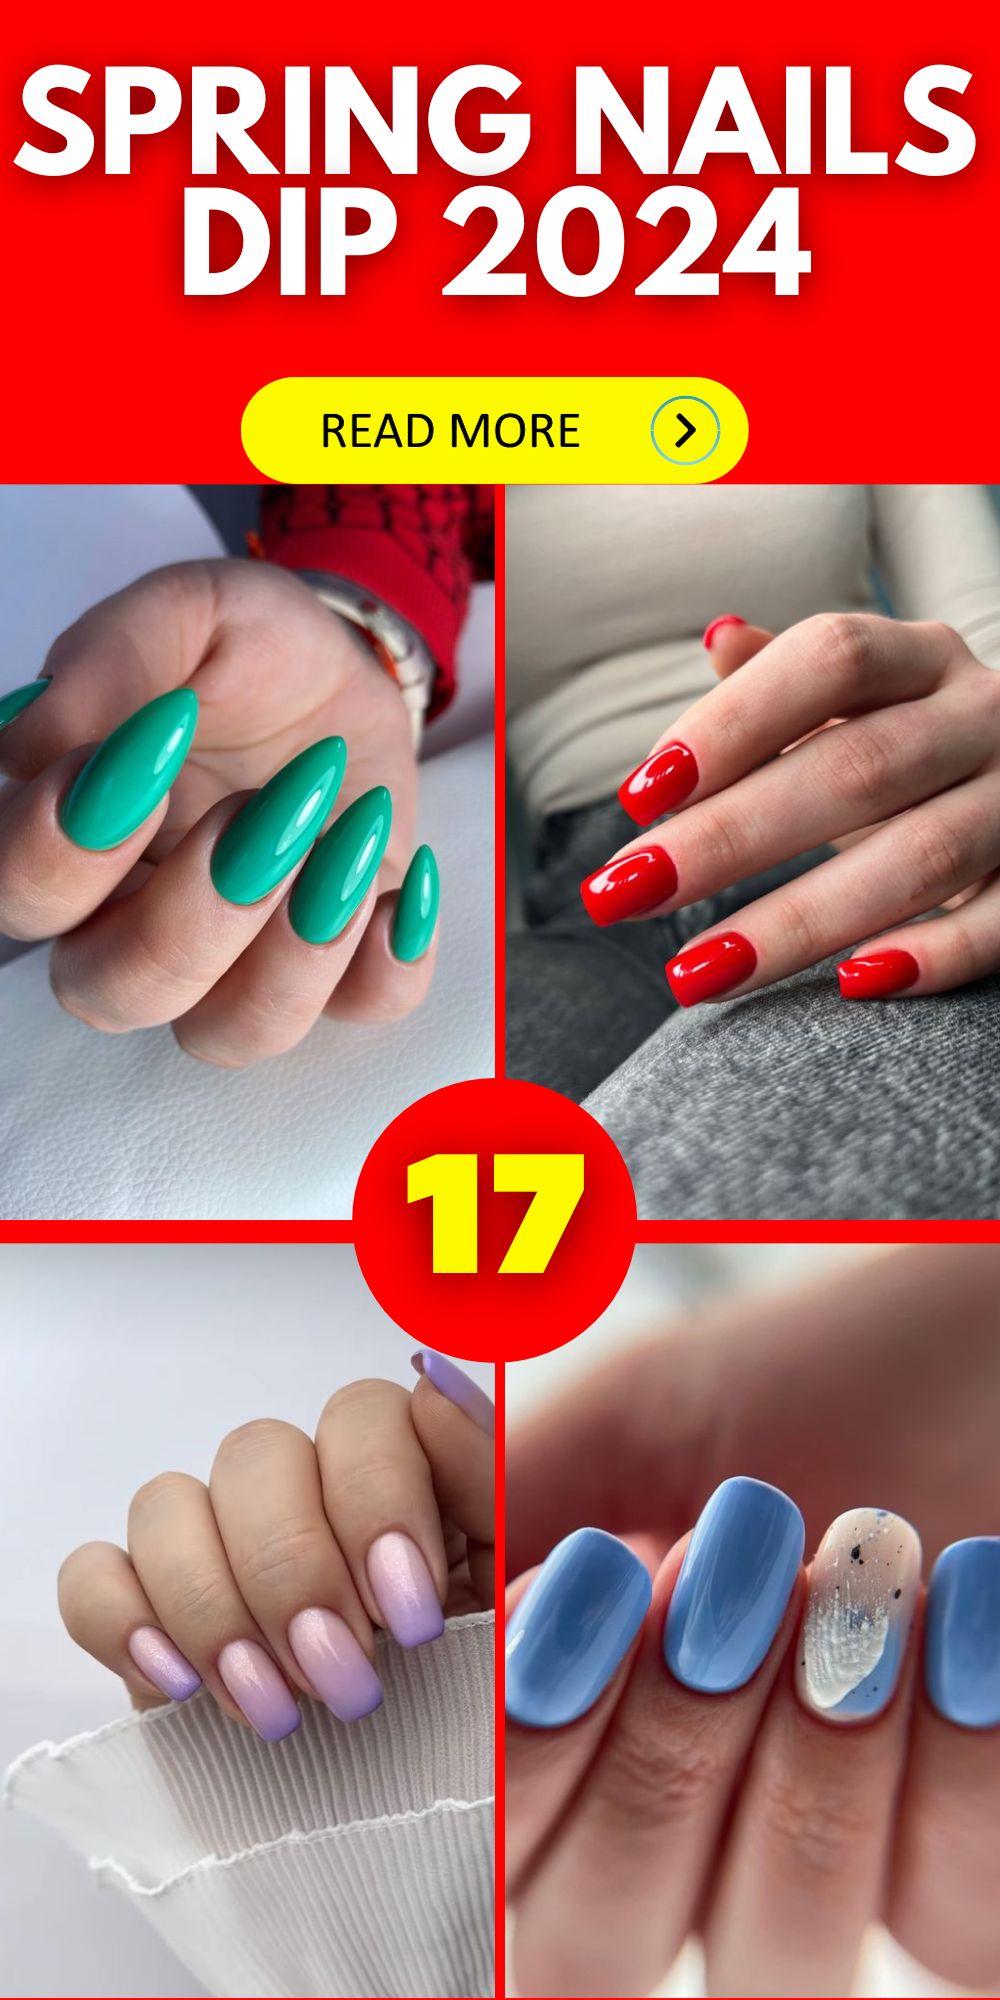 Embrace Spring 2024 with Trendy Dip Nail Colors and Designs